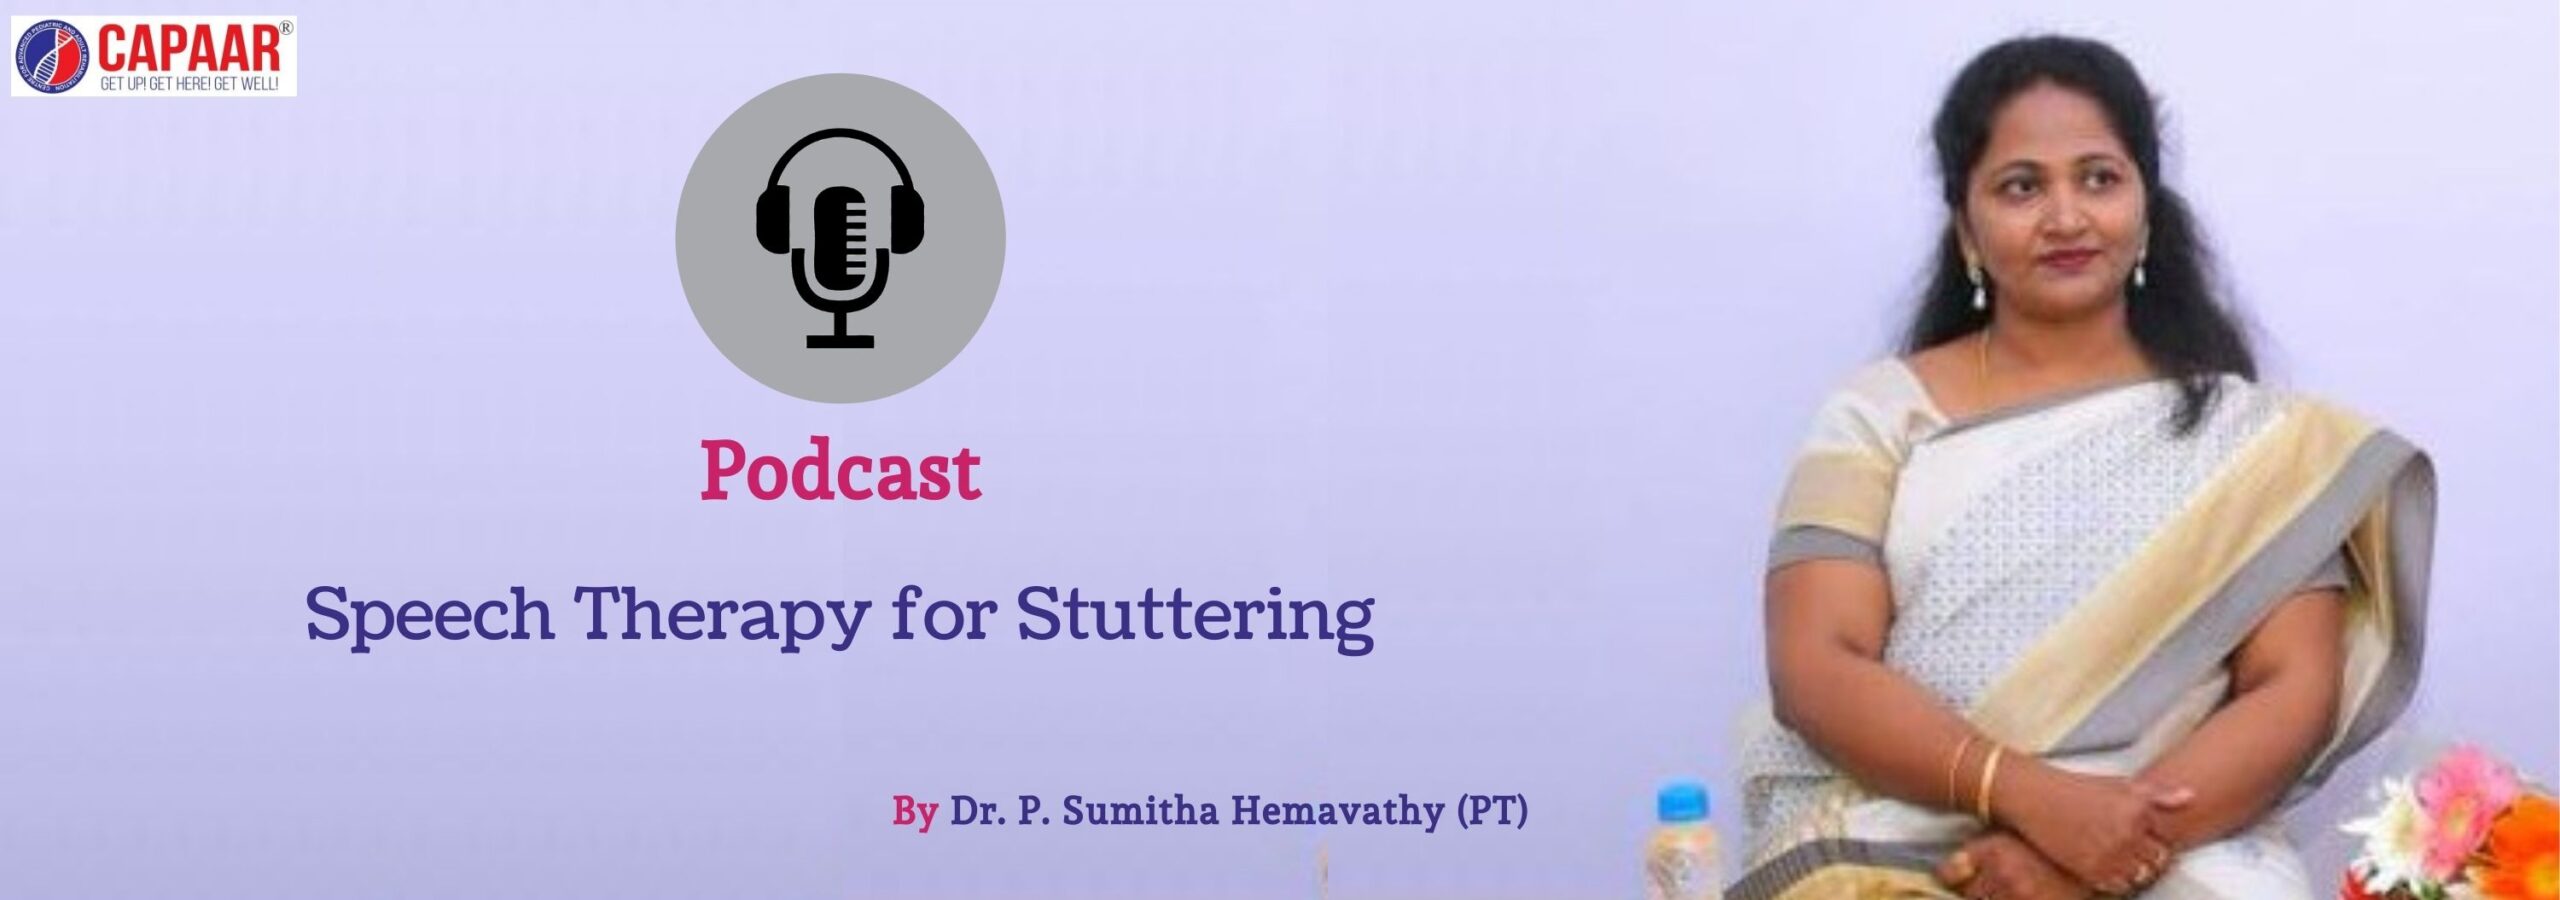 Podcast on Speech Therapy by Dr. P. Sumitha Hemavathy (PT) - CAPAAR